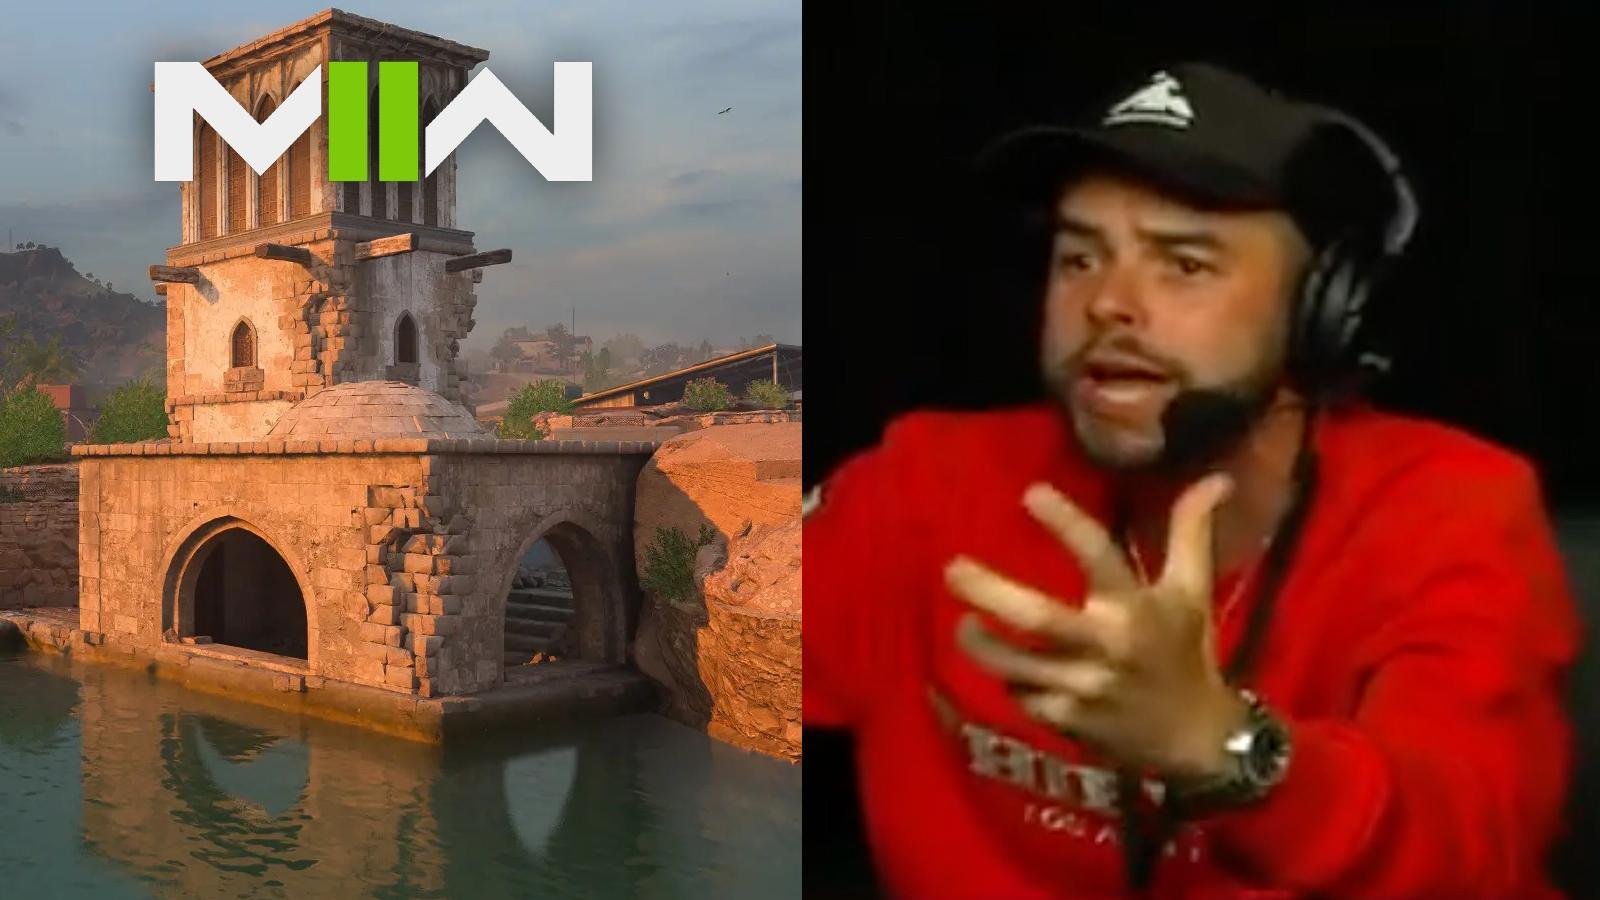 Nadeshot getting angry in Twitch stream on right hand side of image. On the left, Zarqwa Hydroelectric with Modern Warfare 2 logo